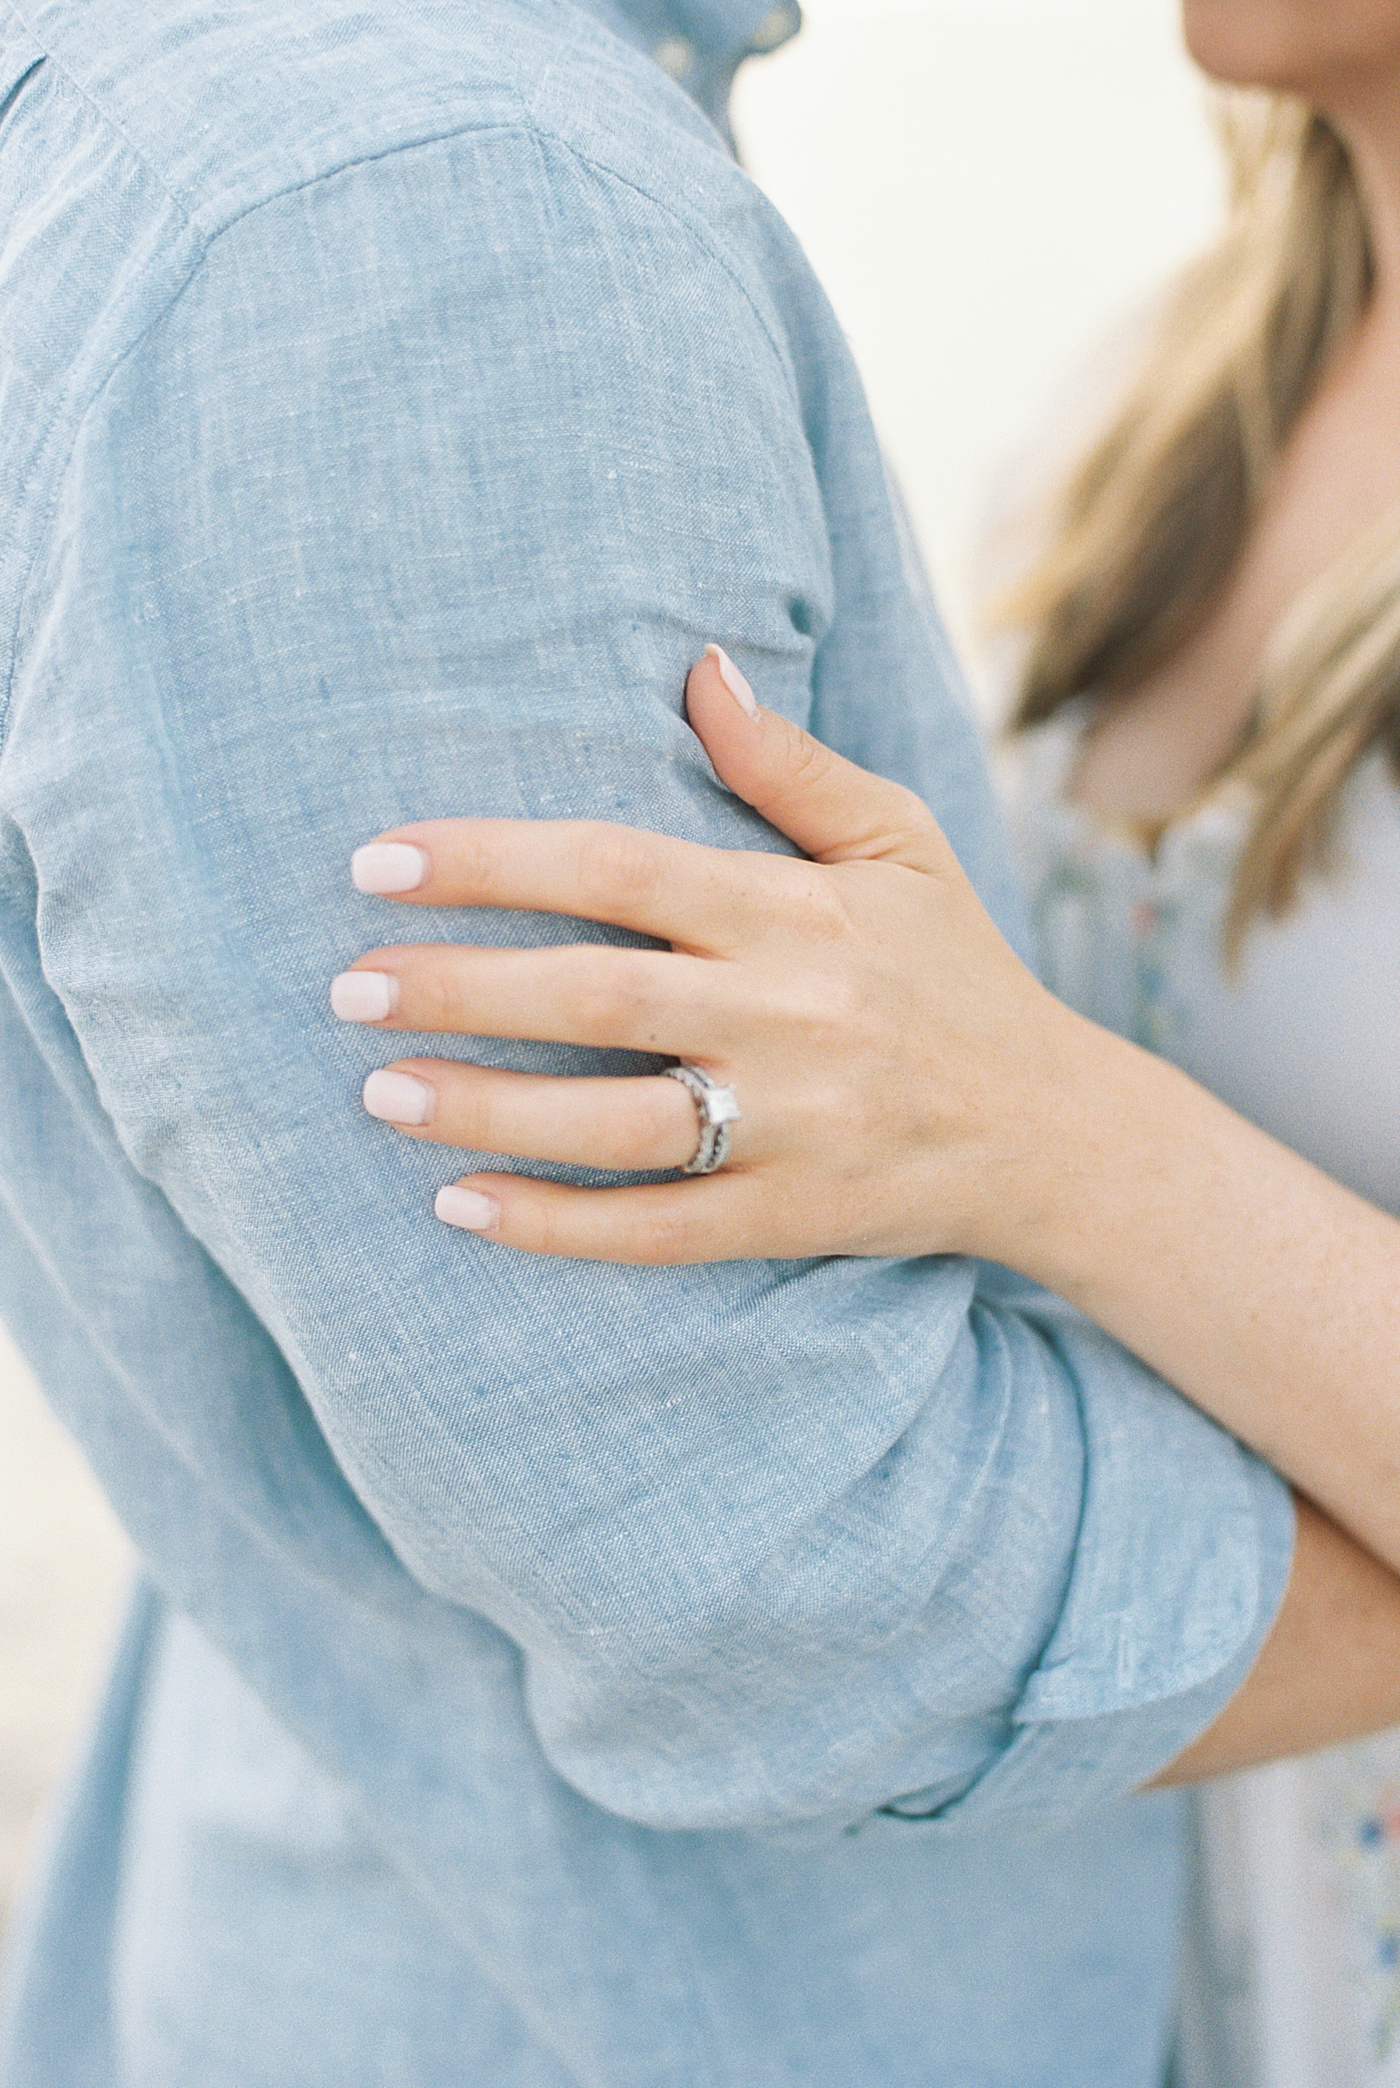 Detail of woman's hand on man's arm | Image by Caitlyn Motycka